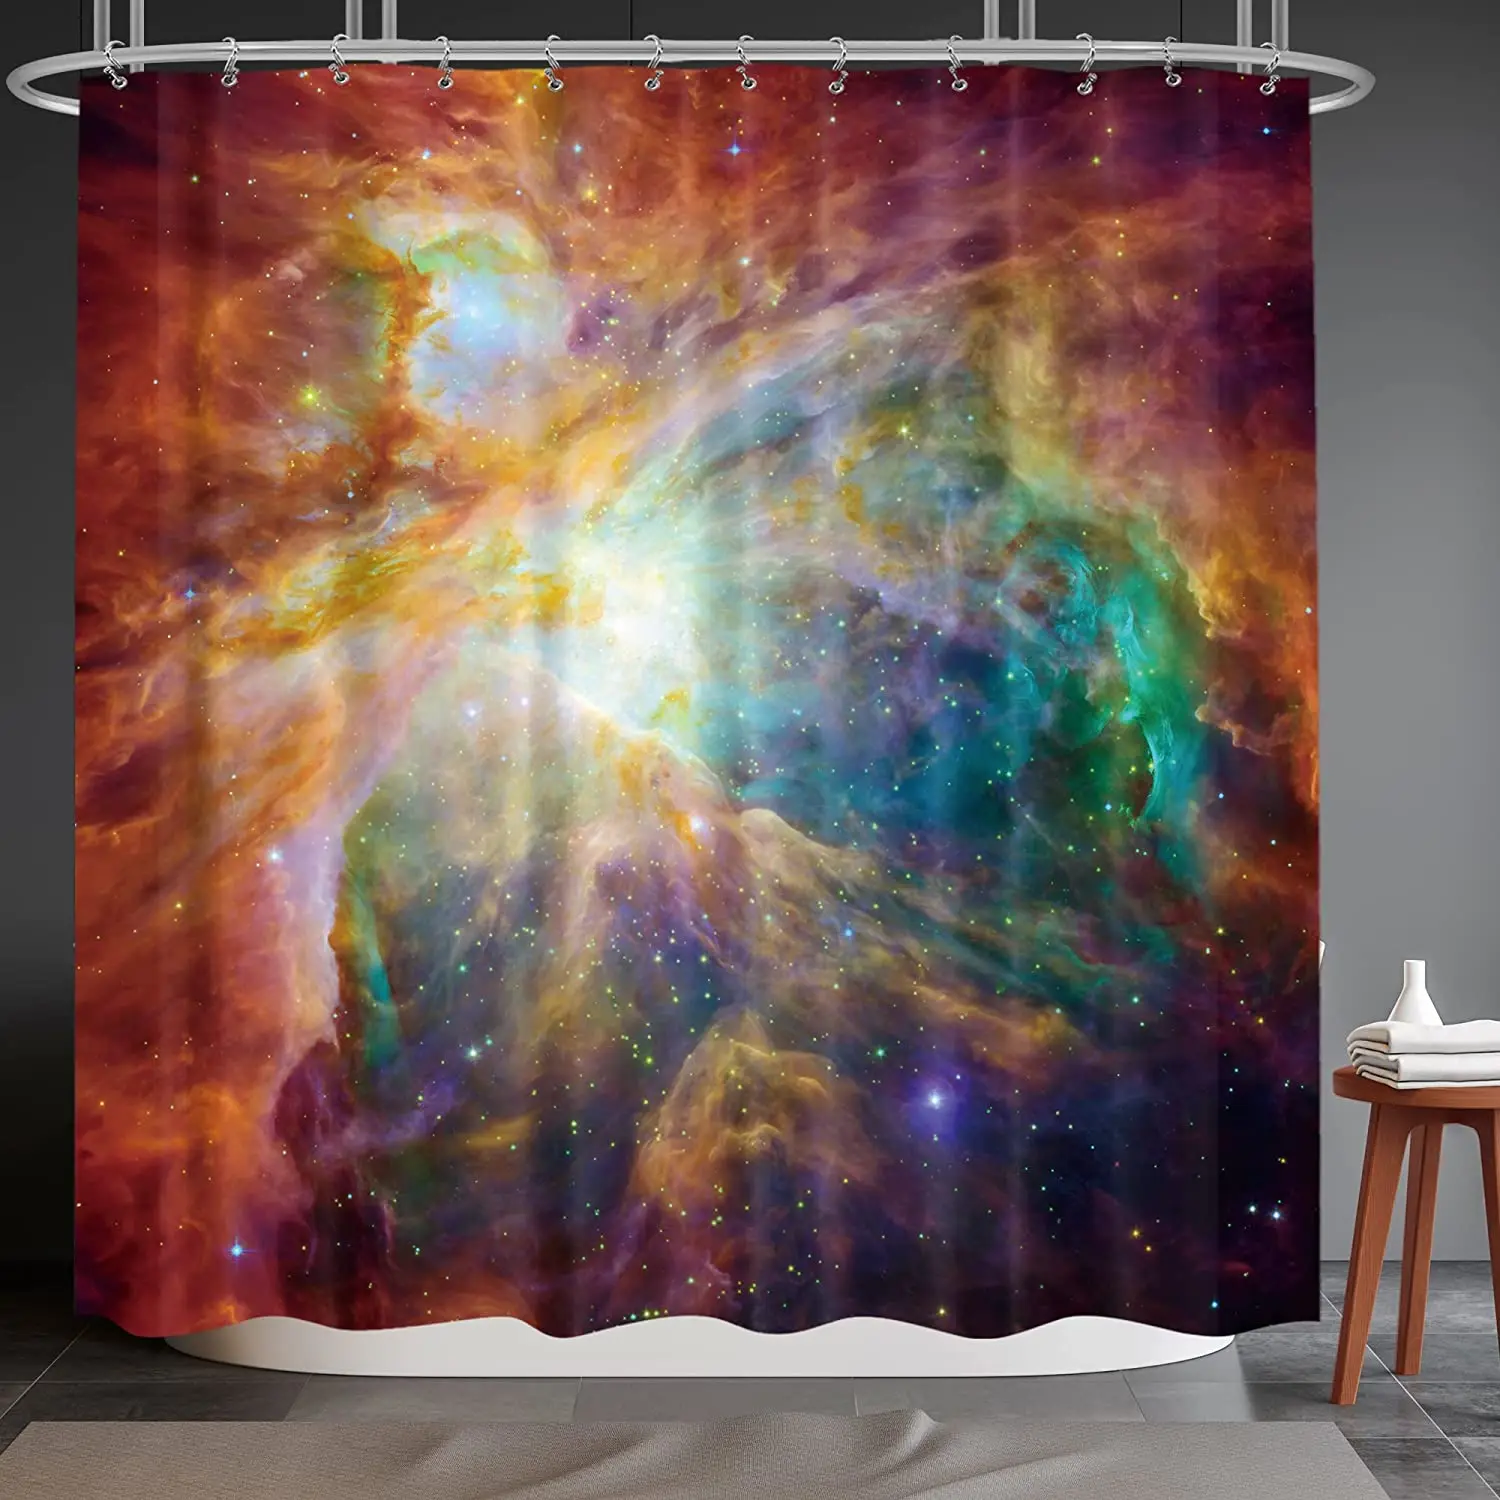 Outer Space Shower Curtain Galaxy Universe Colorful Psychedelic Planet Nebula Star Night Sky Bathroom Set Polyester Waterproof